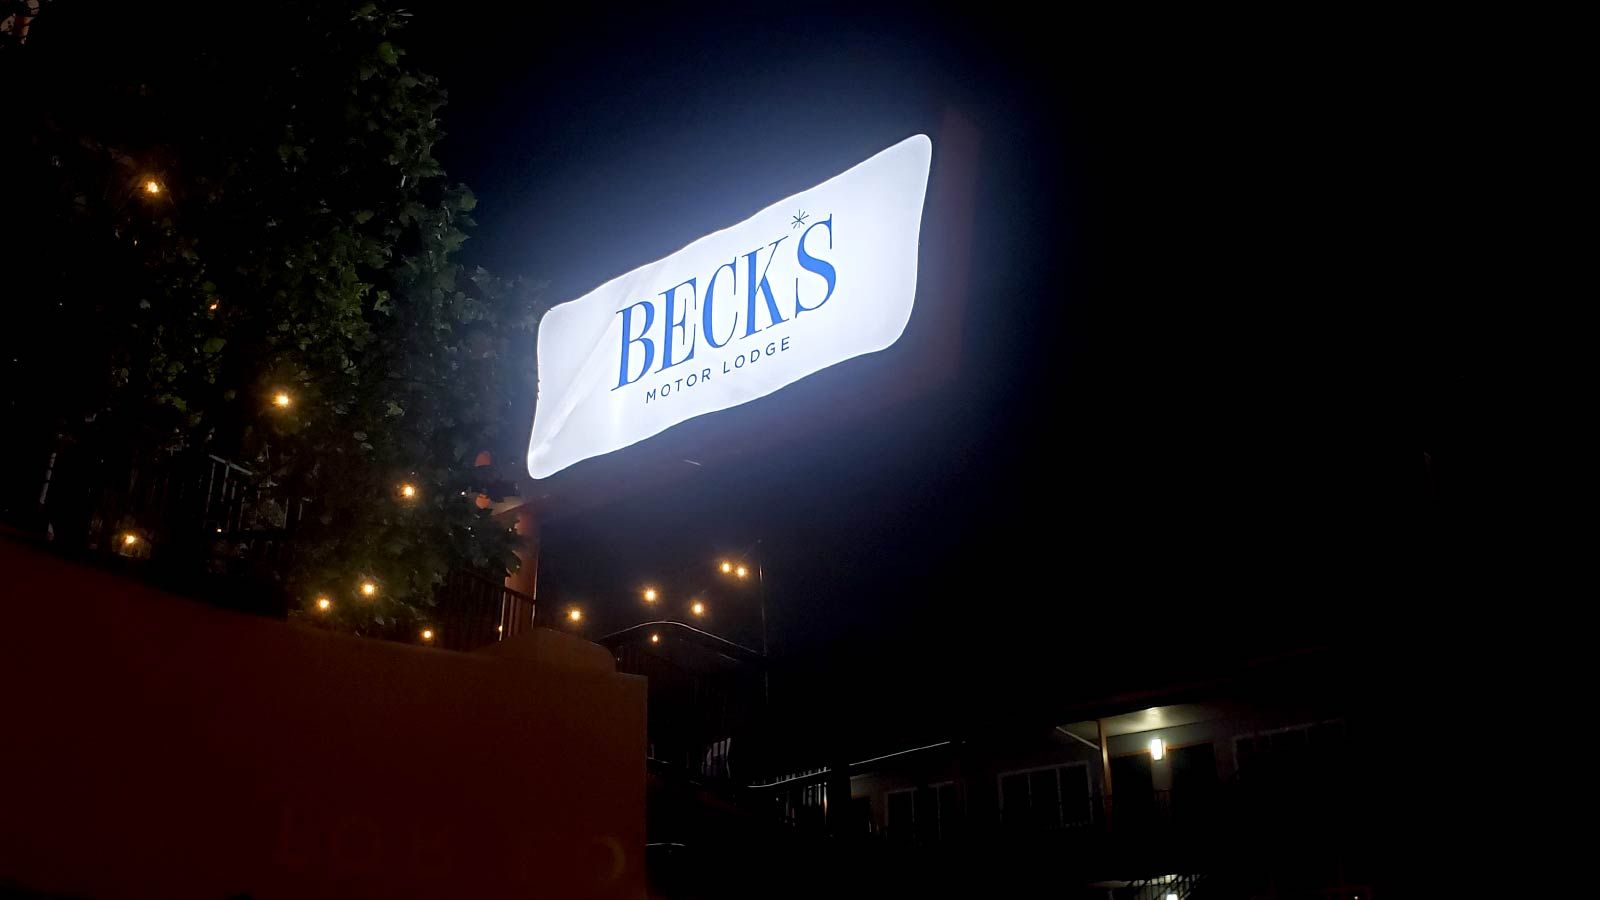 Beck's motor lodge high rise sign